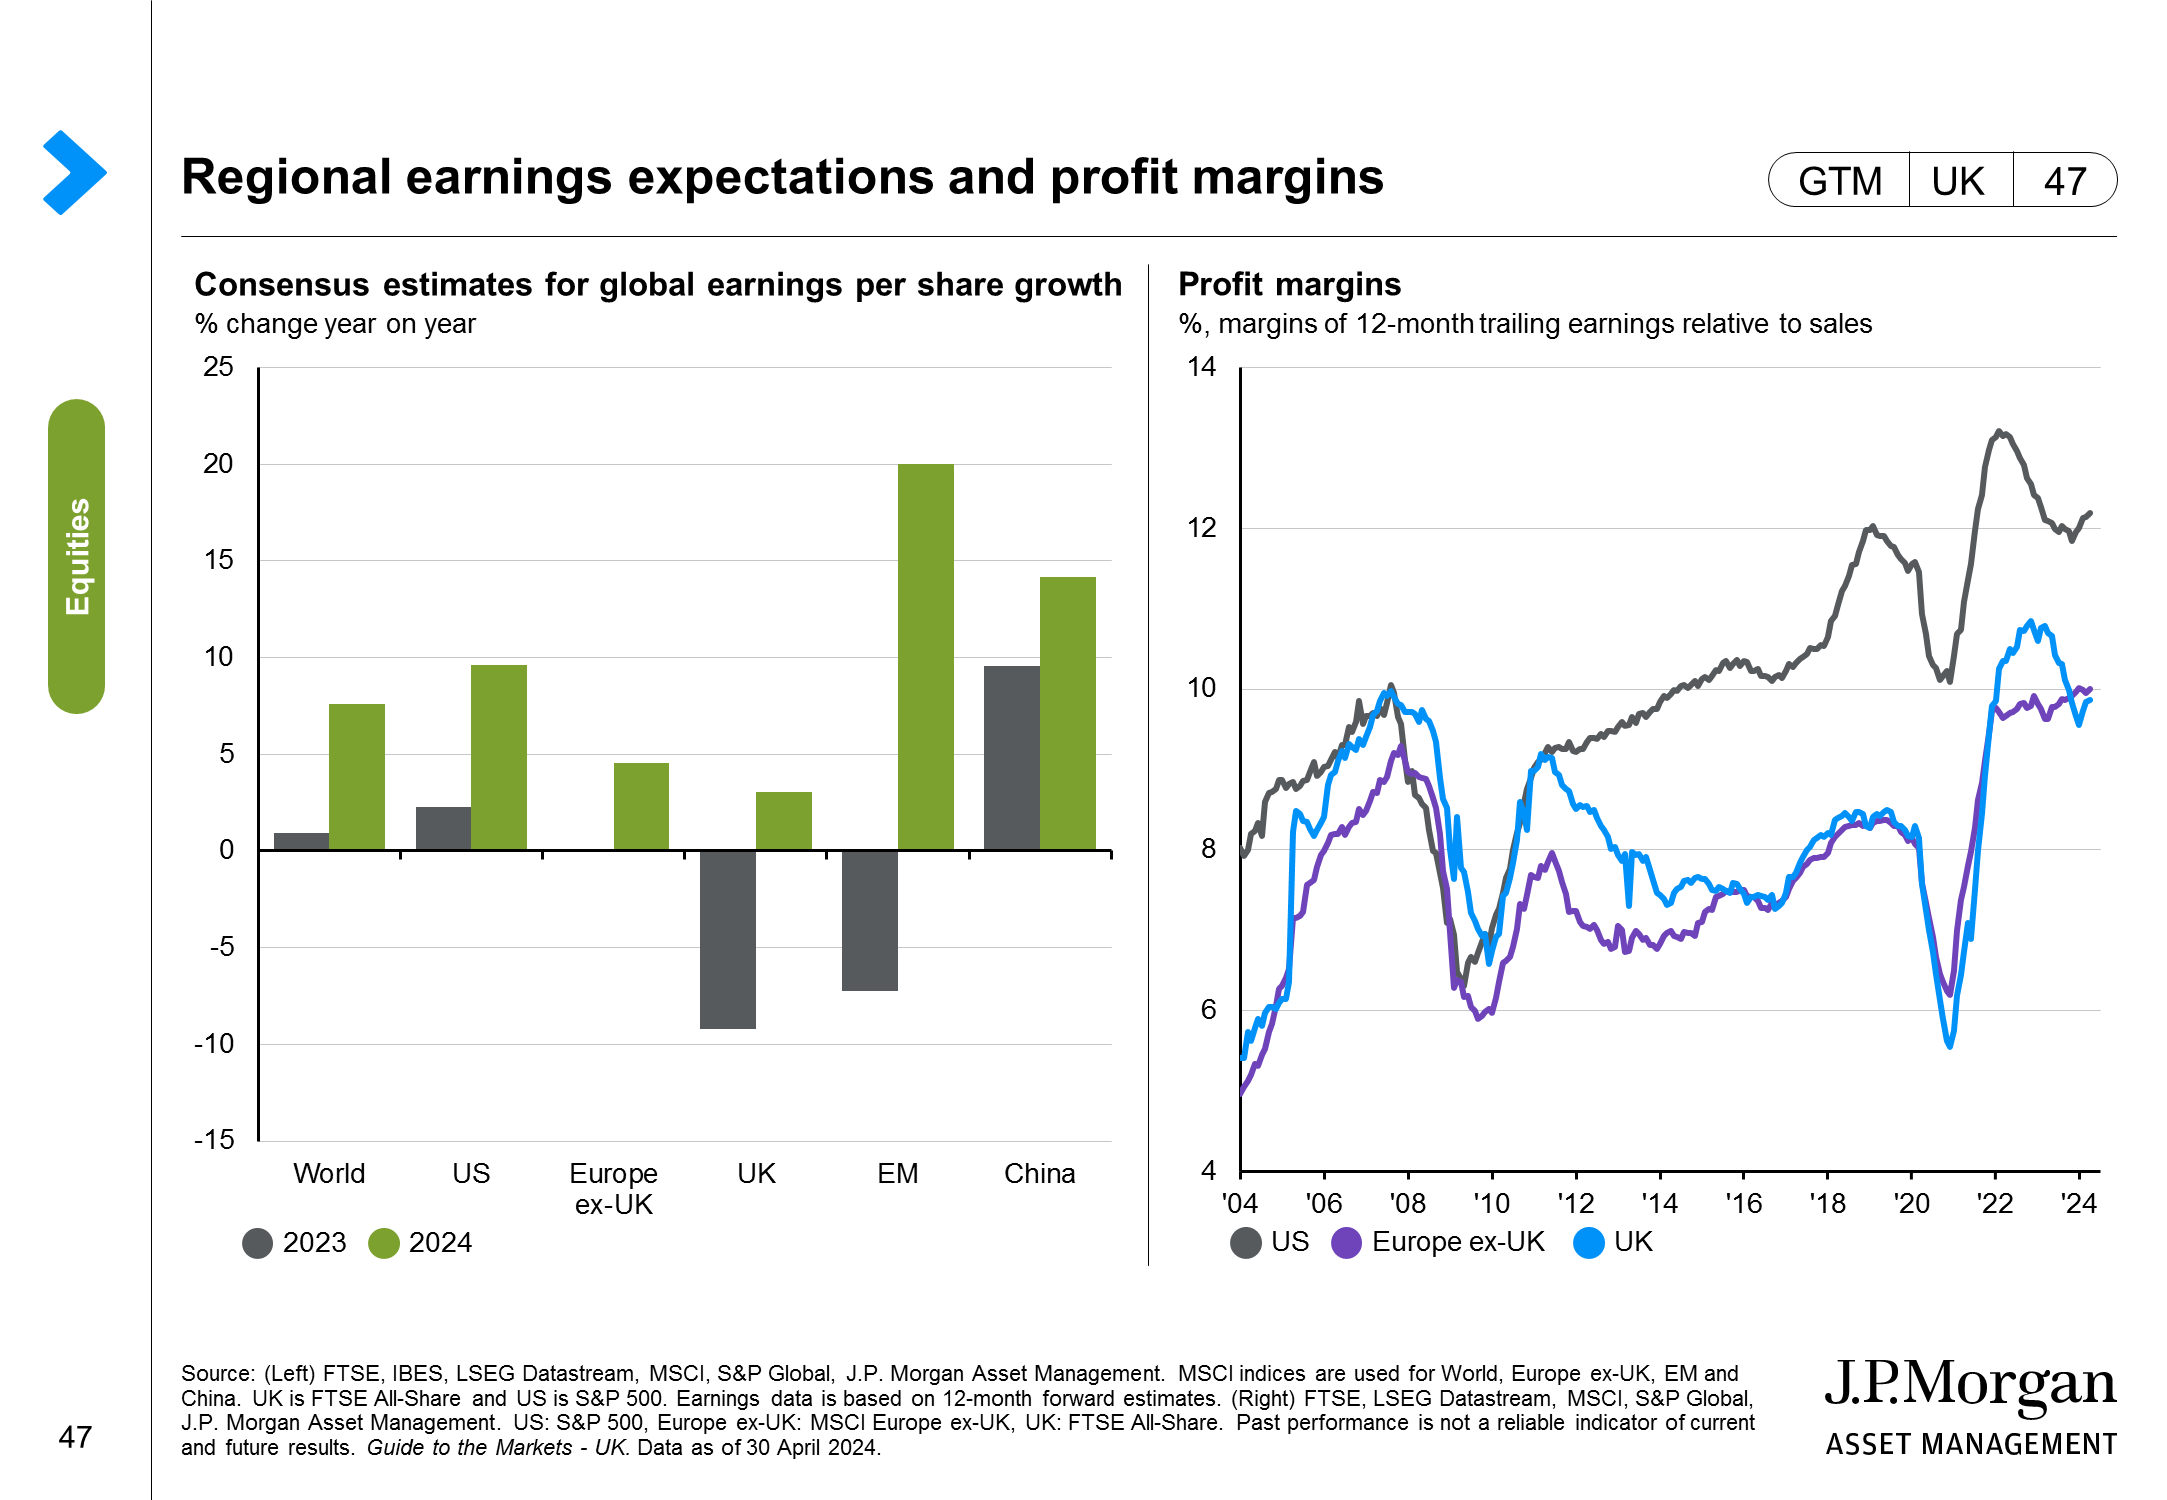 Regional earnings expectations and equity valuations